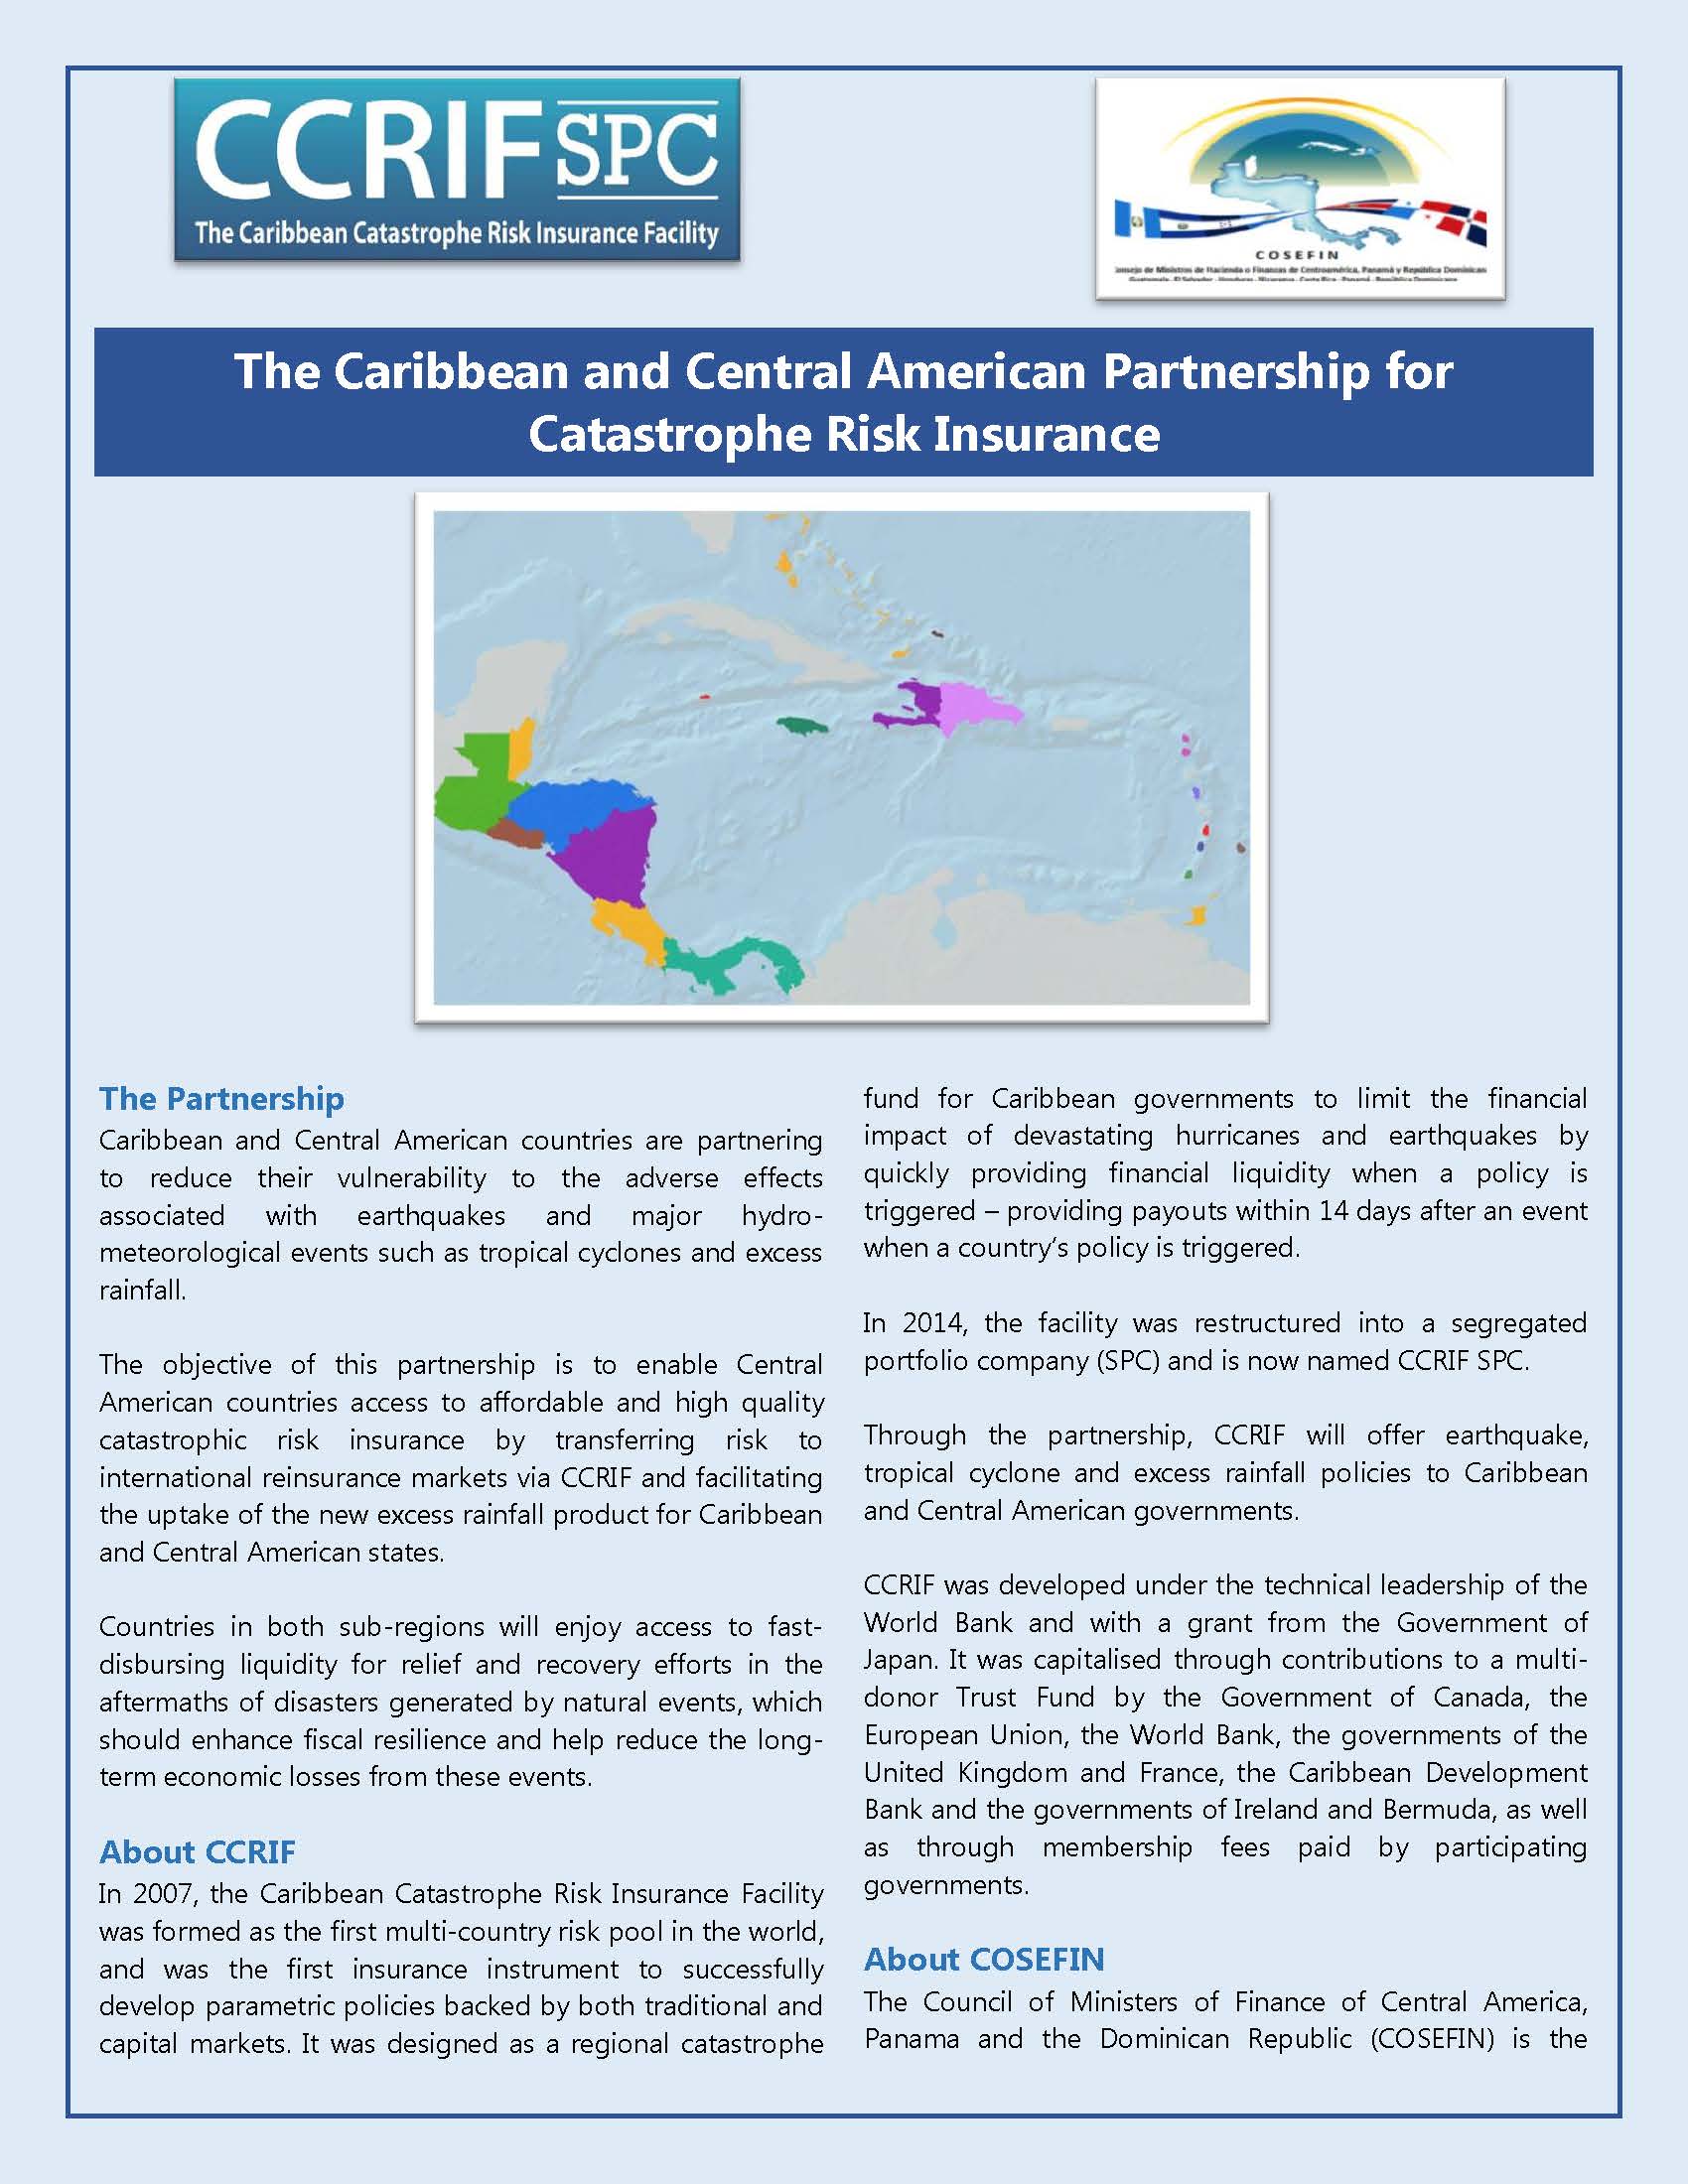 The Caribbean and Central American Partnership for Catastrophe Risk Insurance